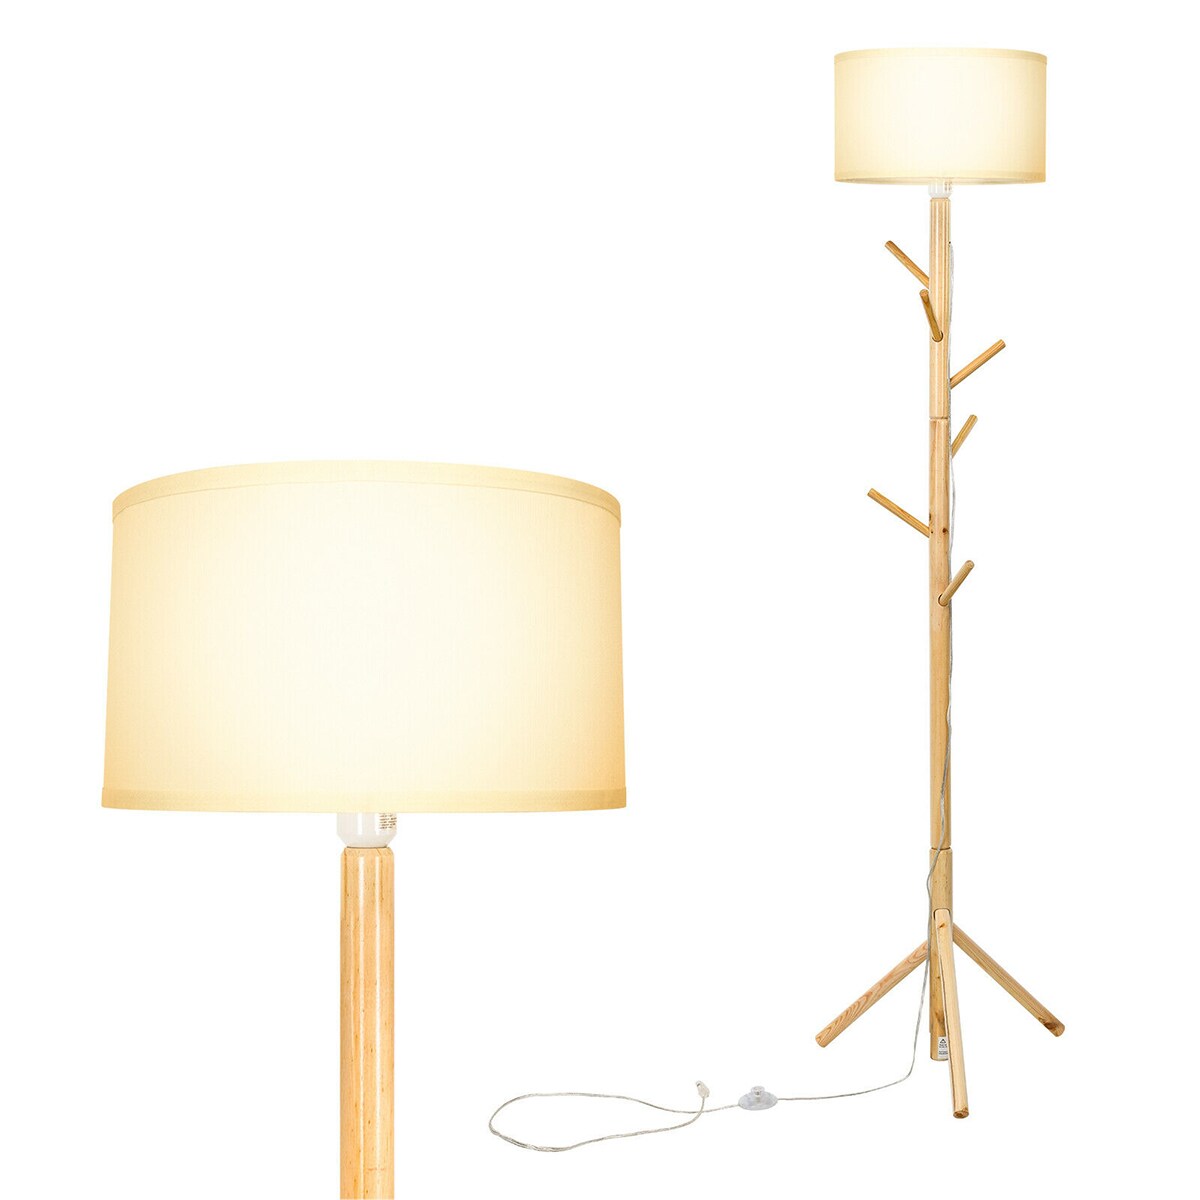 WELLFOR CW Magnifying Lamp 62-in White Swing-arm Floor Lamp in the